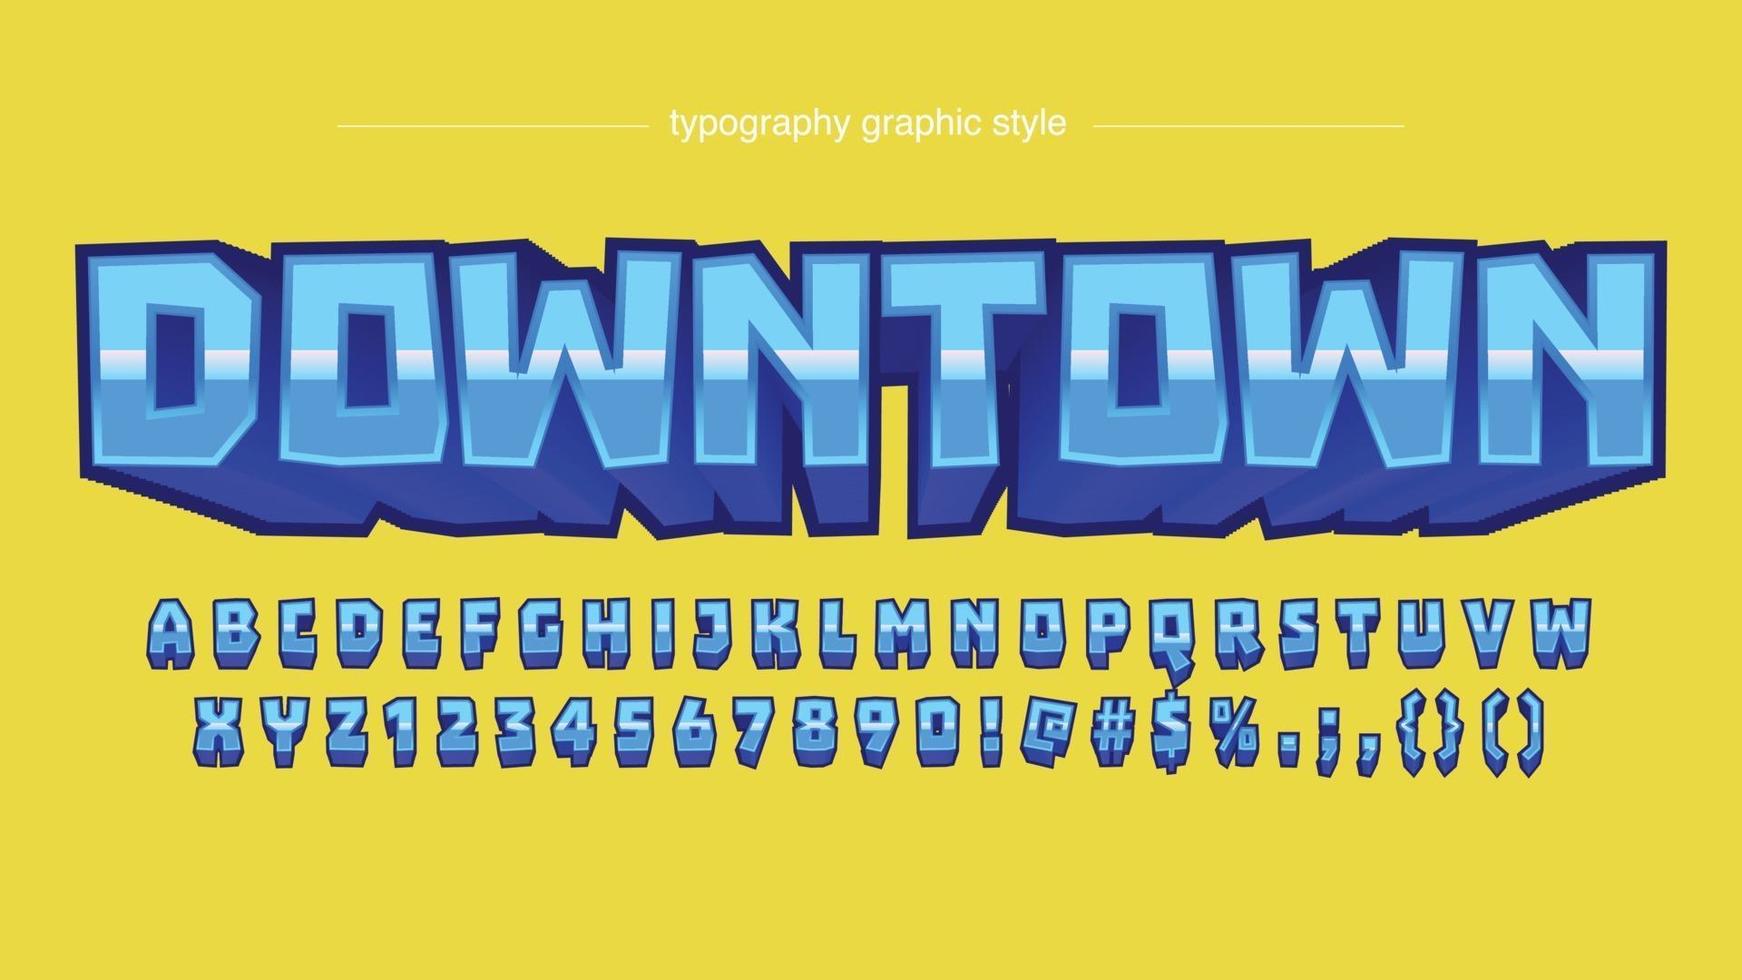 Blue glossy 3d cartoon artistic typography vector